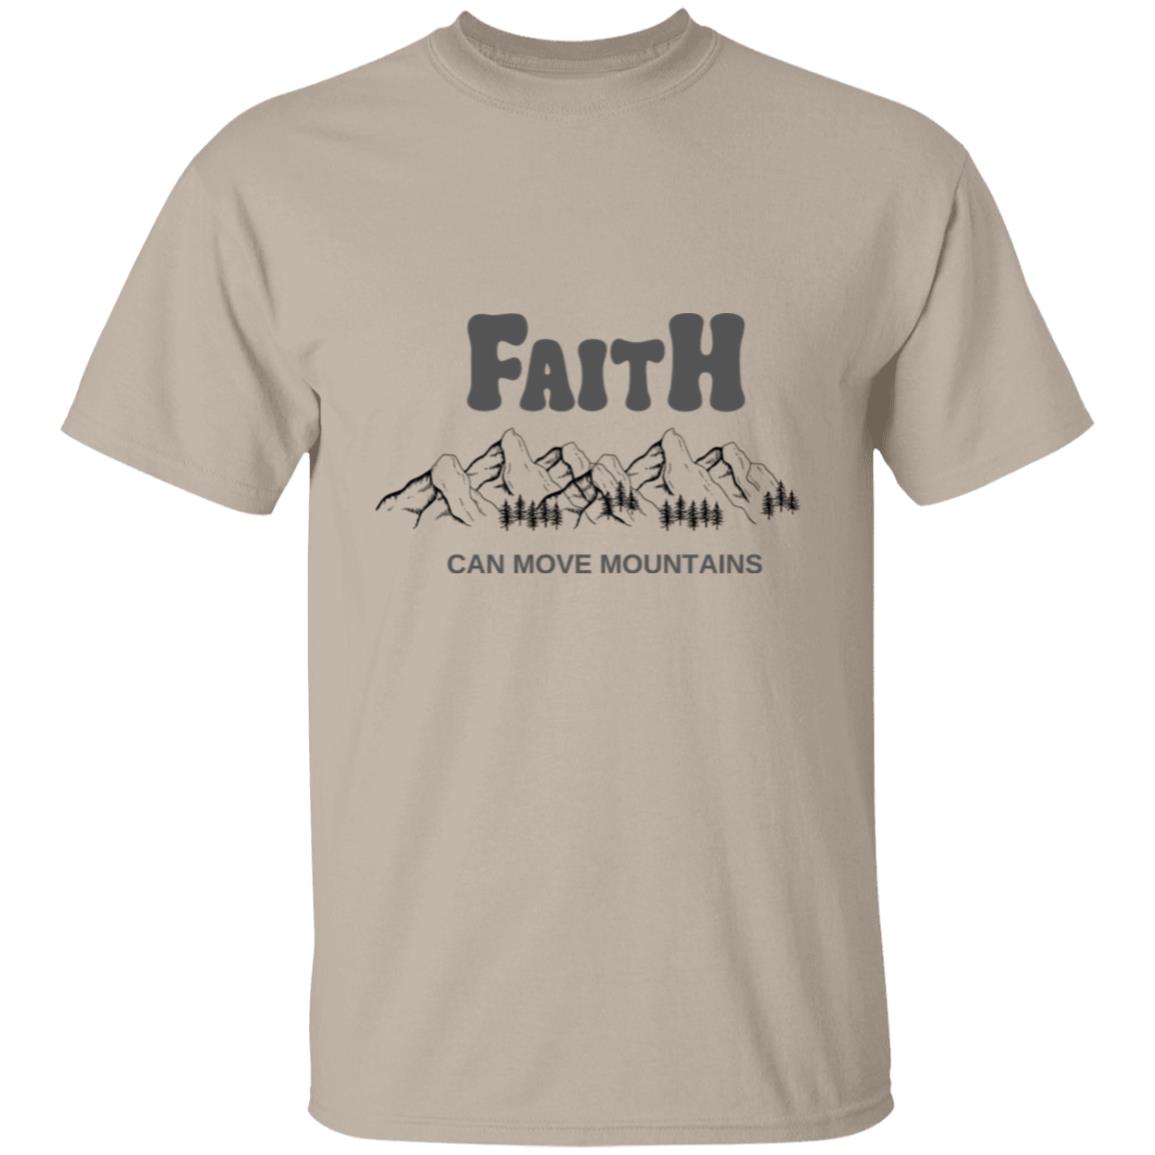 Get trendy with Faith Can Move Mouuntains (1) Faith Can Move Mountains T-Shirt - T-Shirts available at Good Gift Company. Grab yours for $19.95 today!